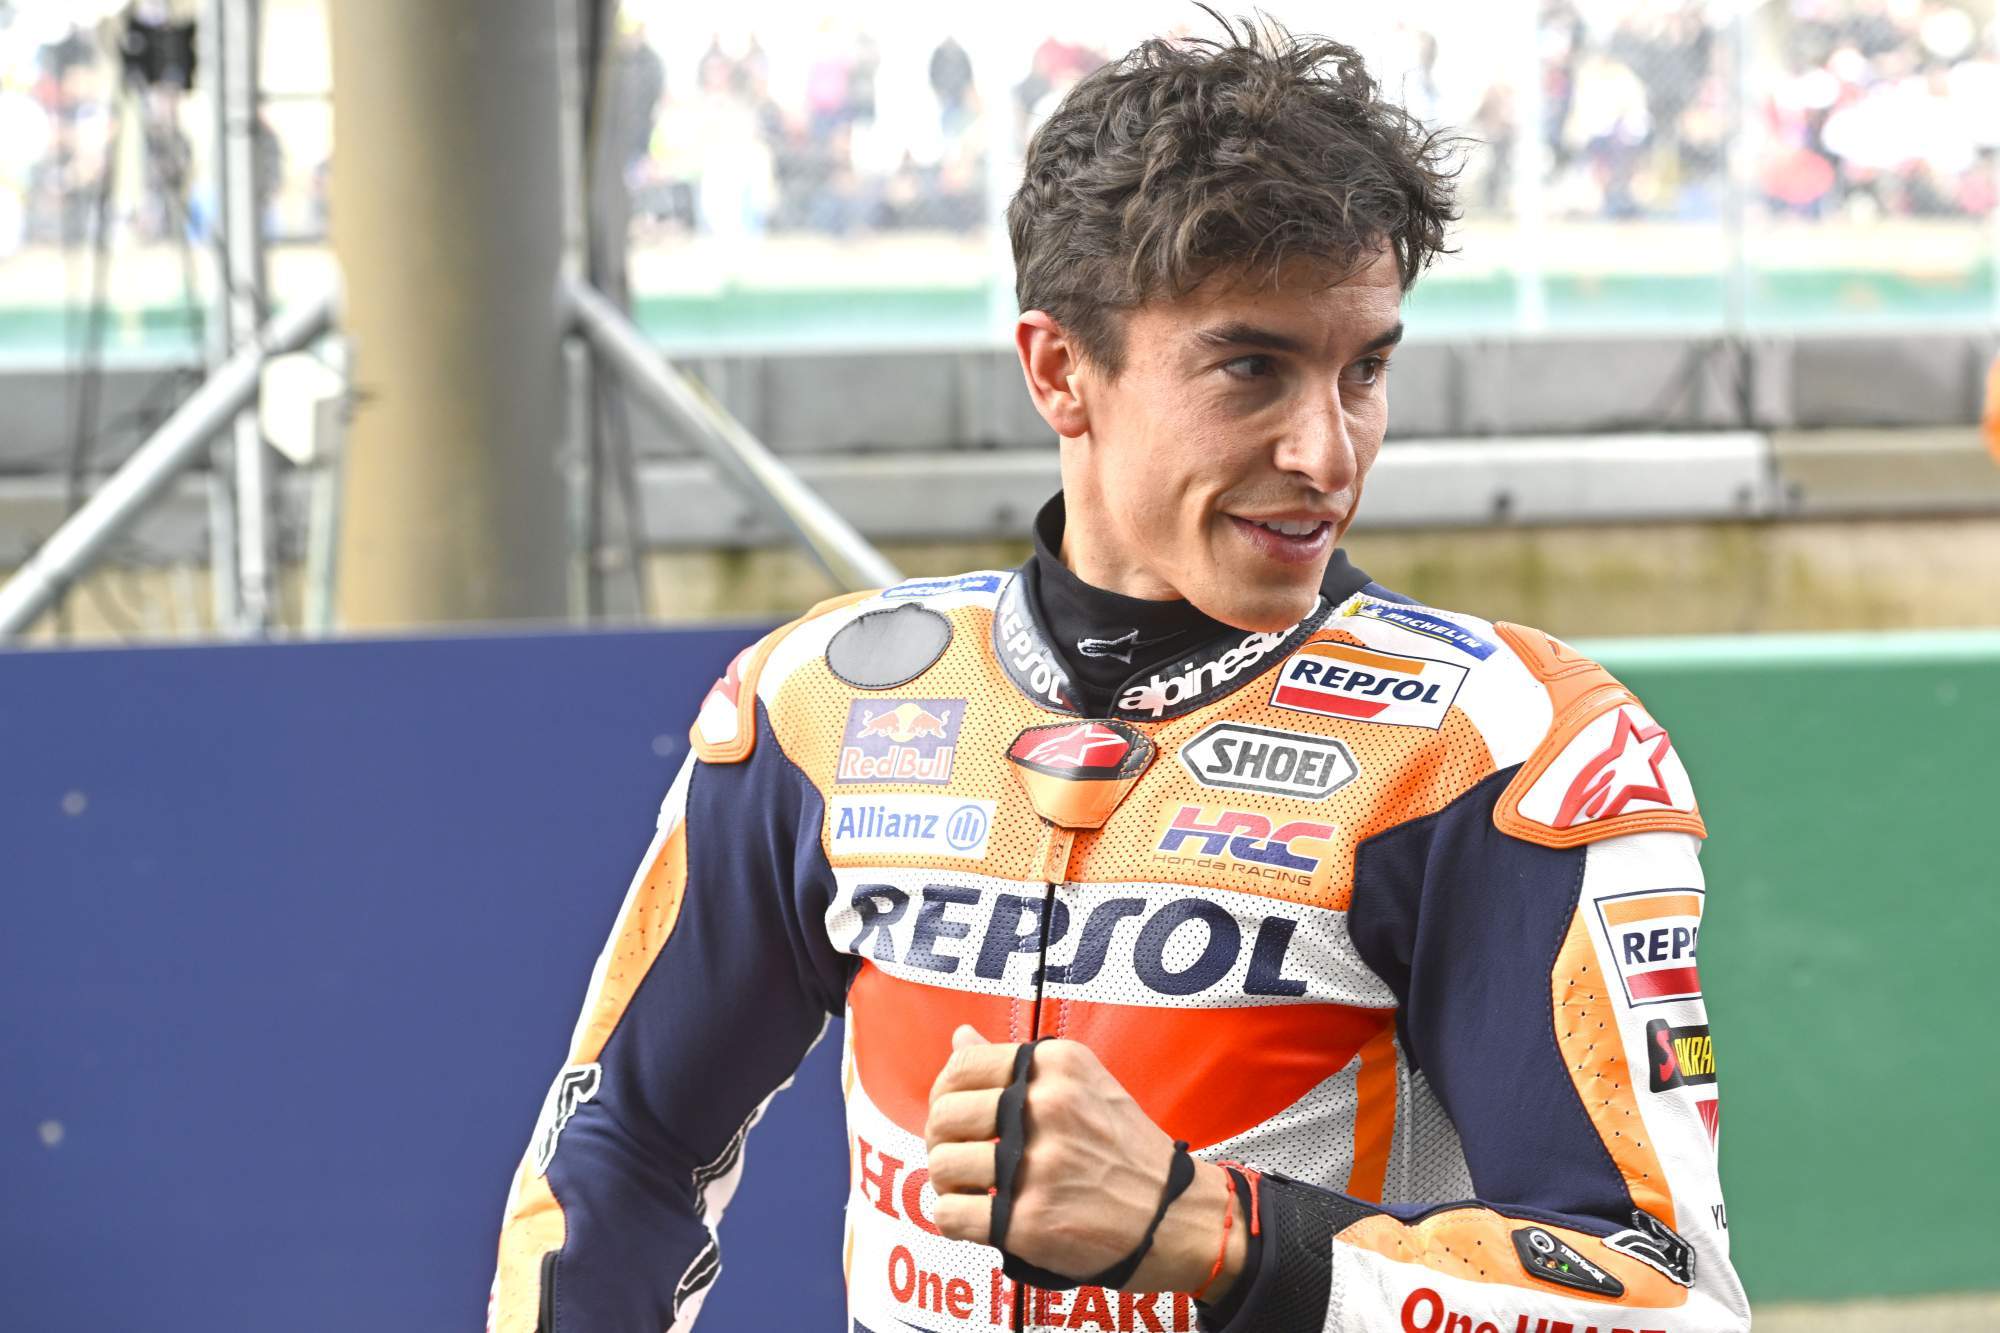 Is Marquez's trademark outlook costing him a title shot? - The Race